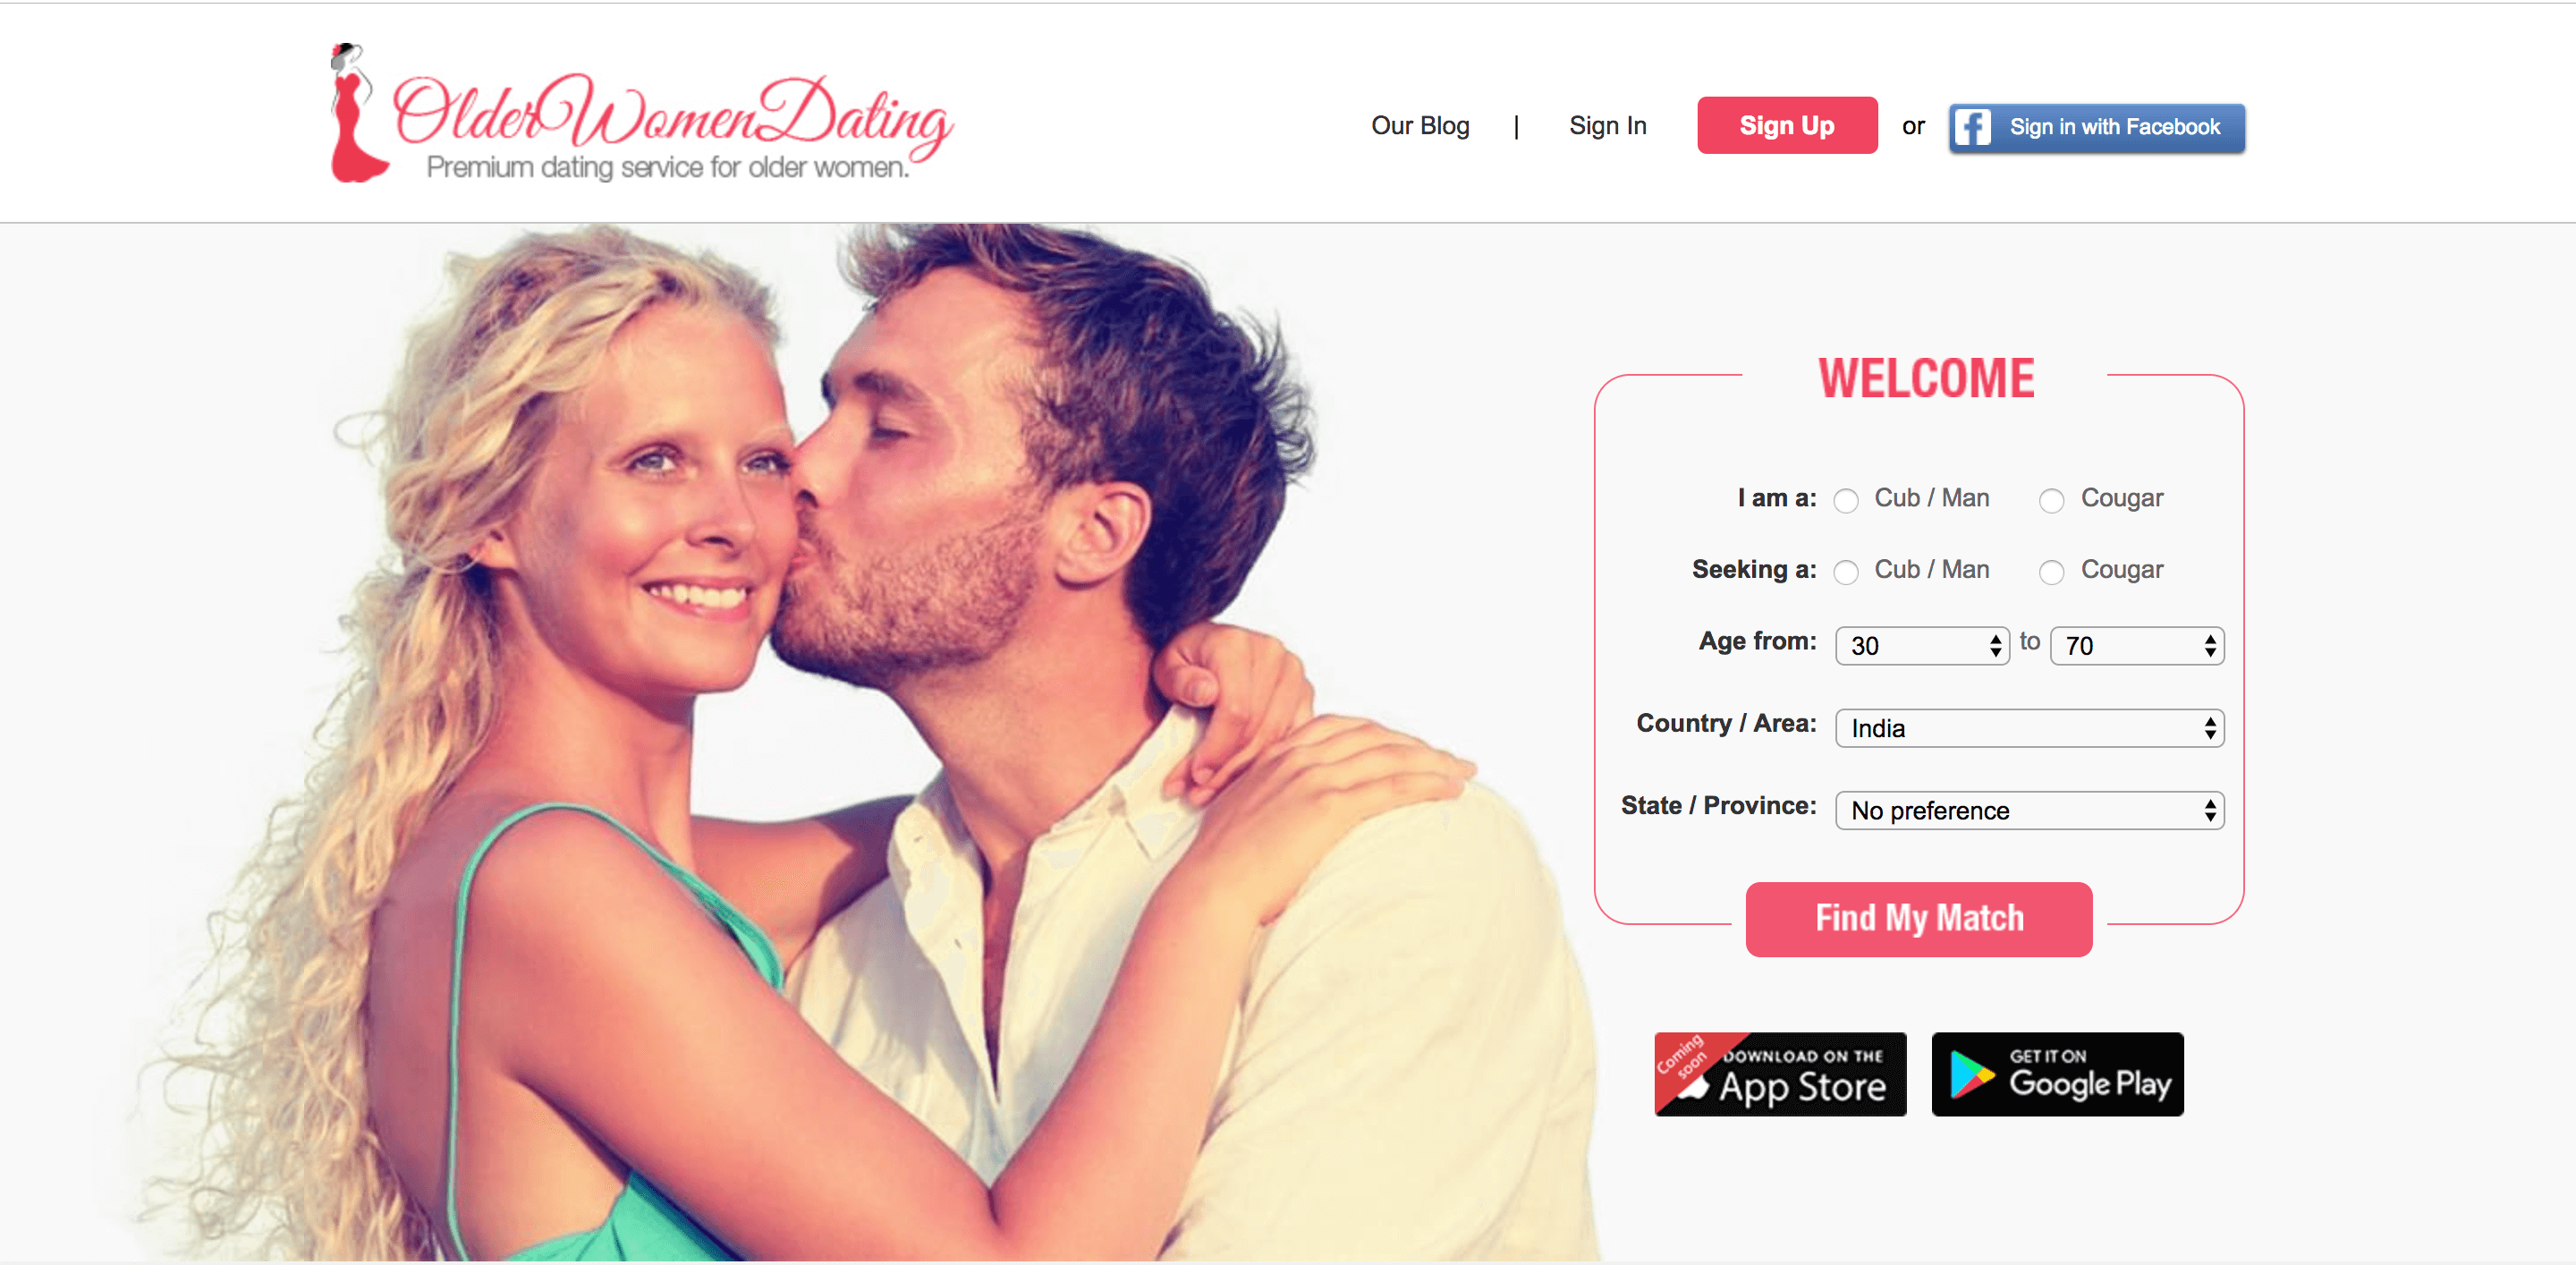 Cougar dating site